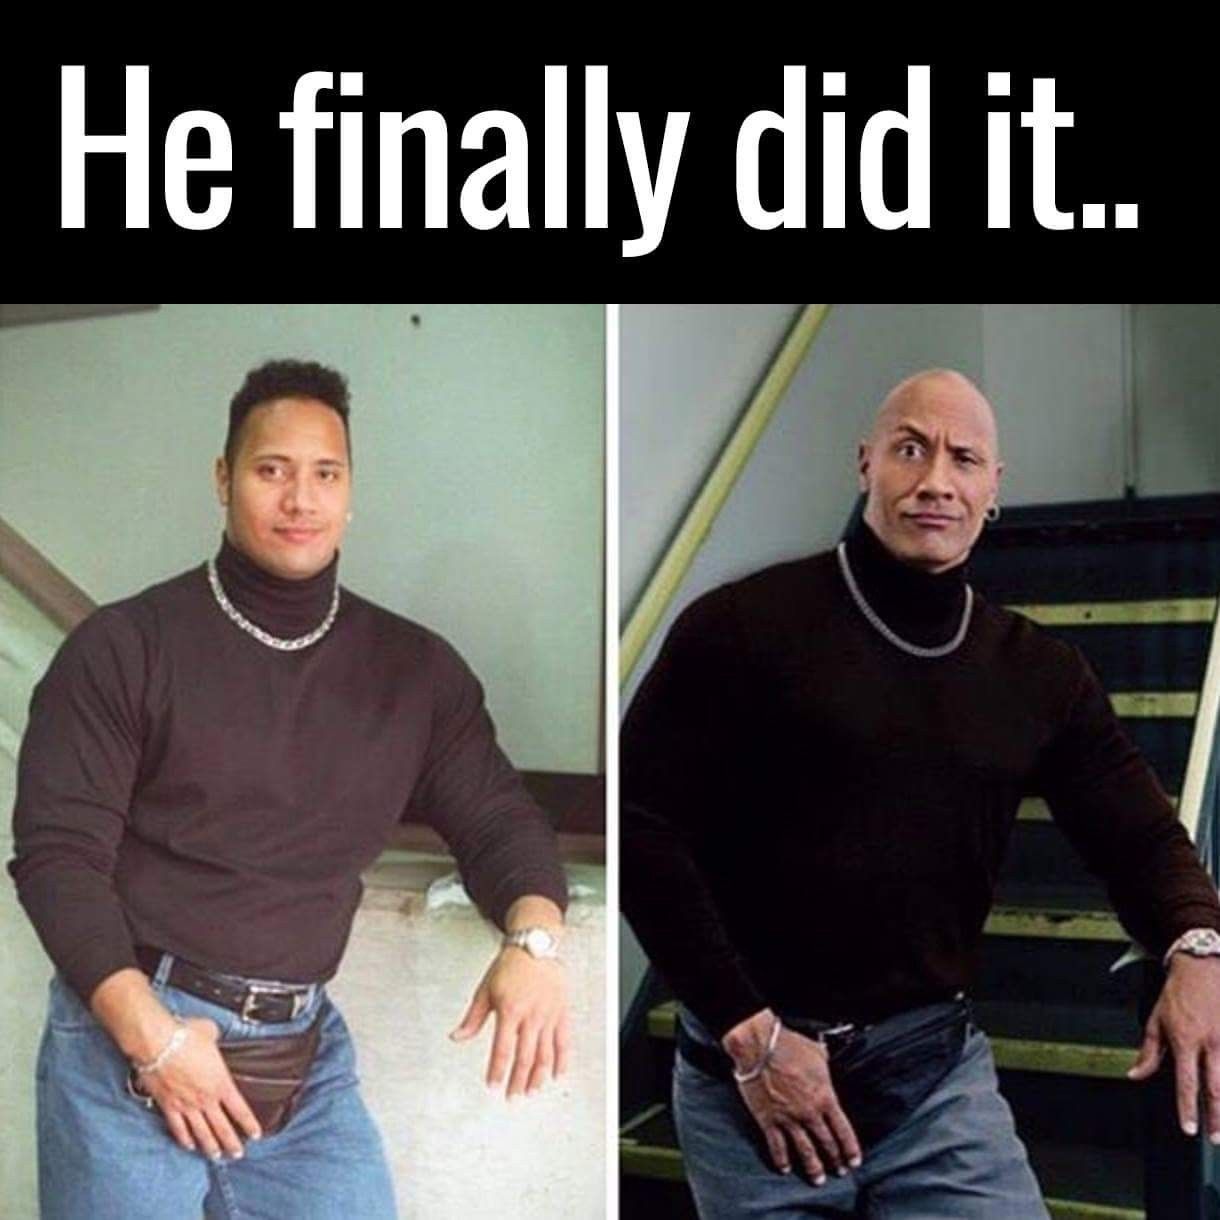 The best Dwayne 'The Rock' Johnson memes of all time